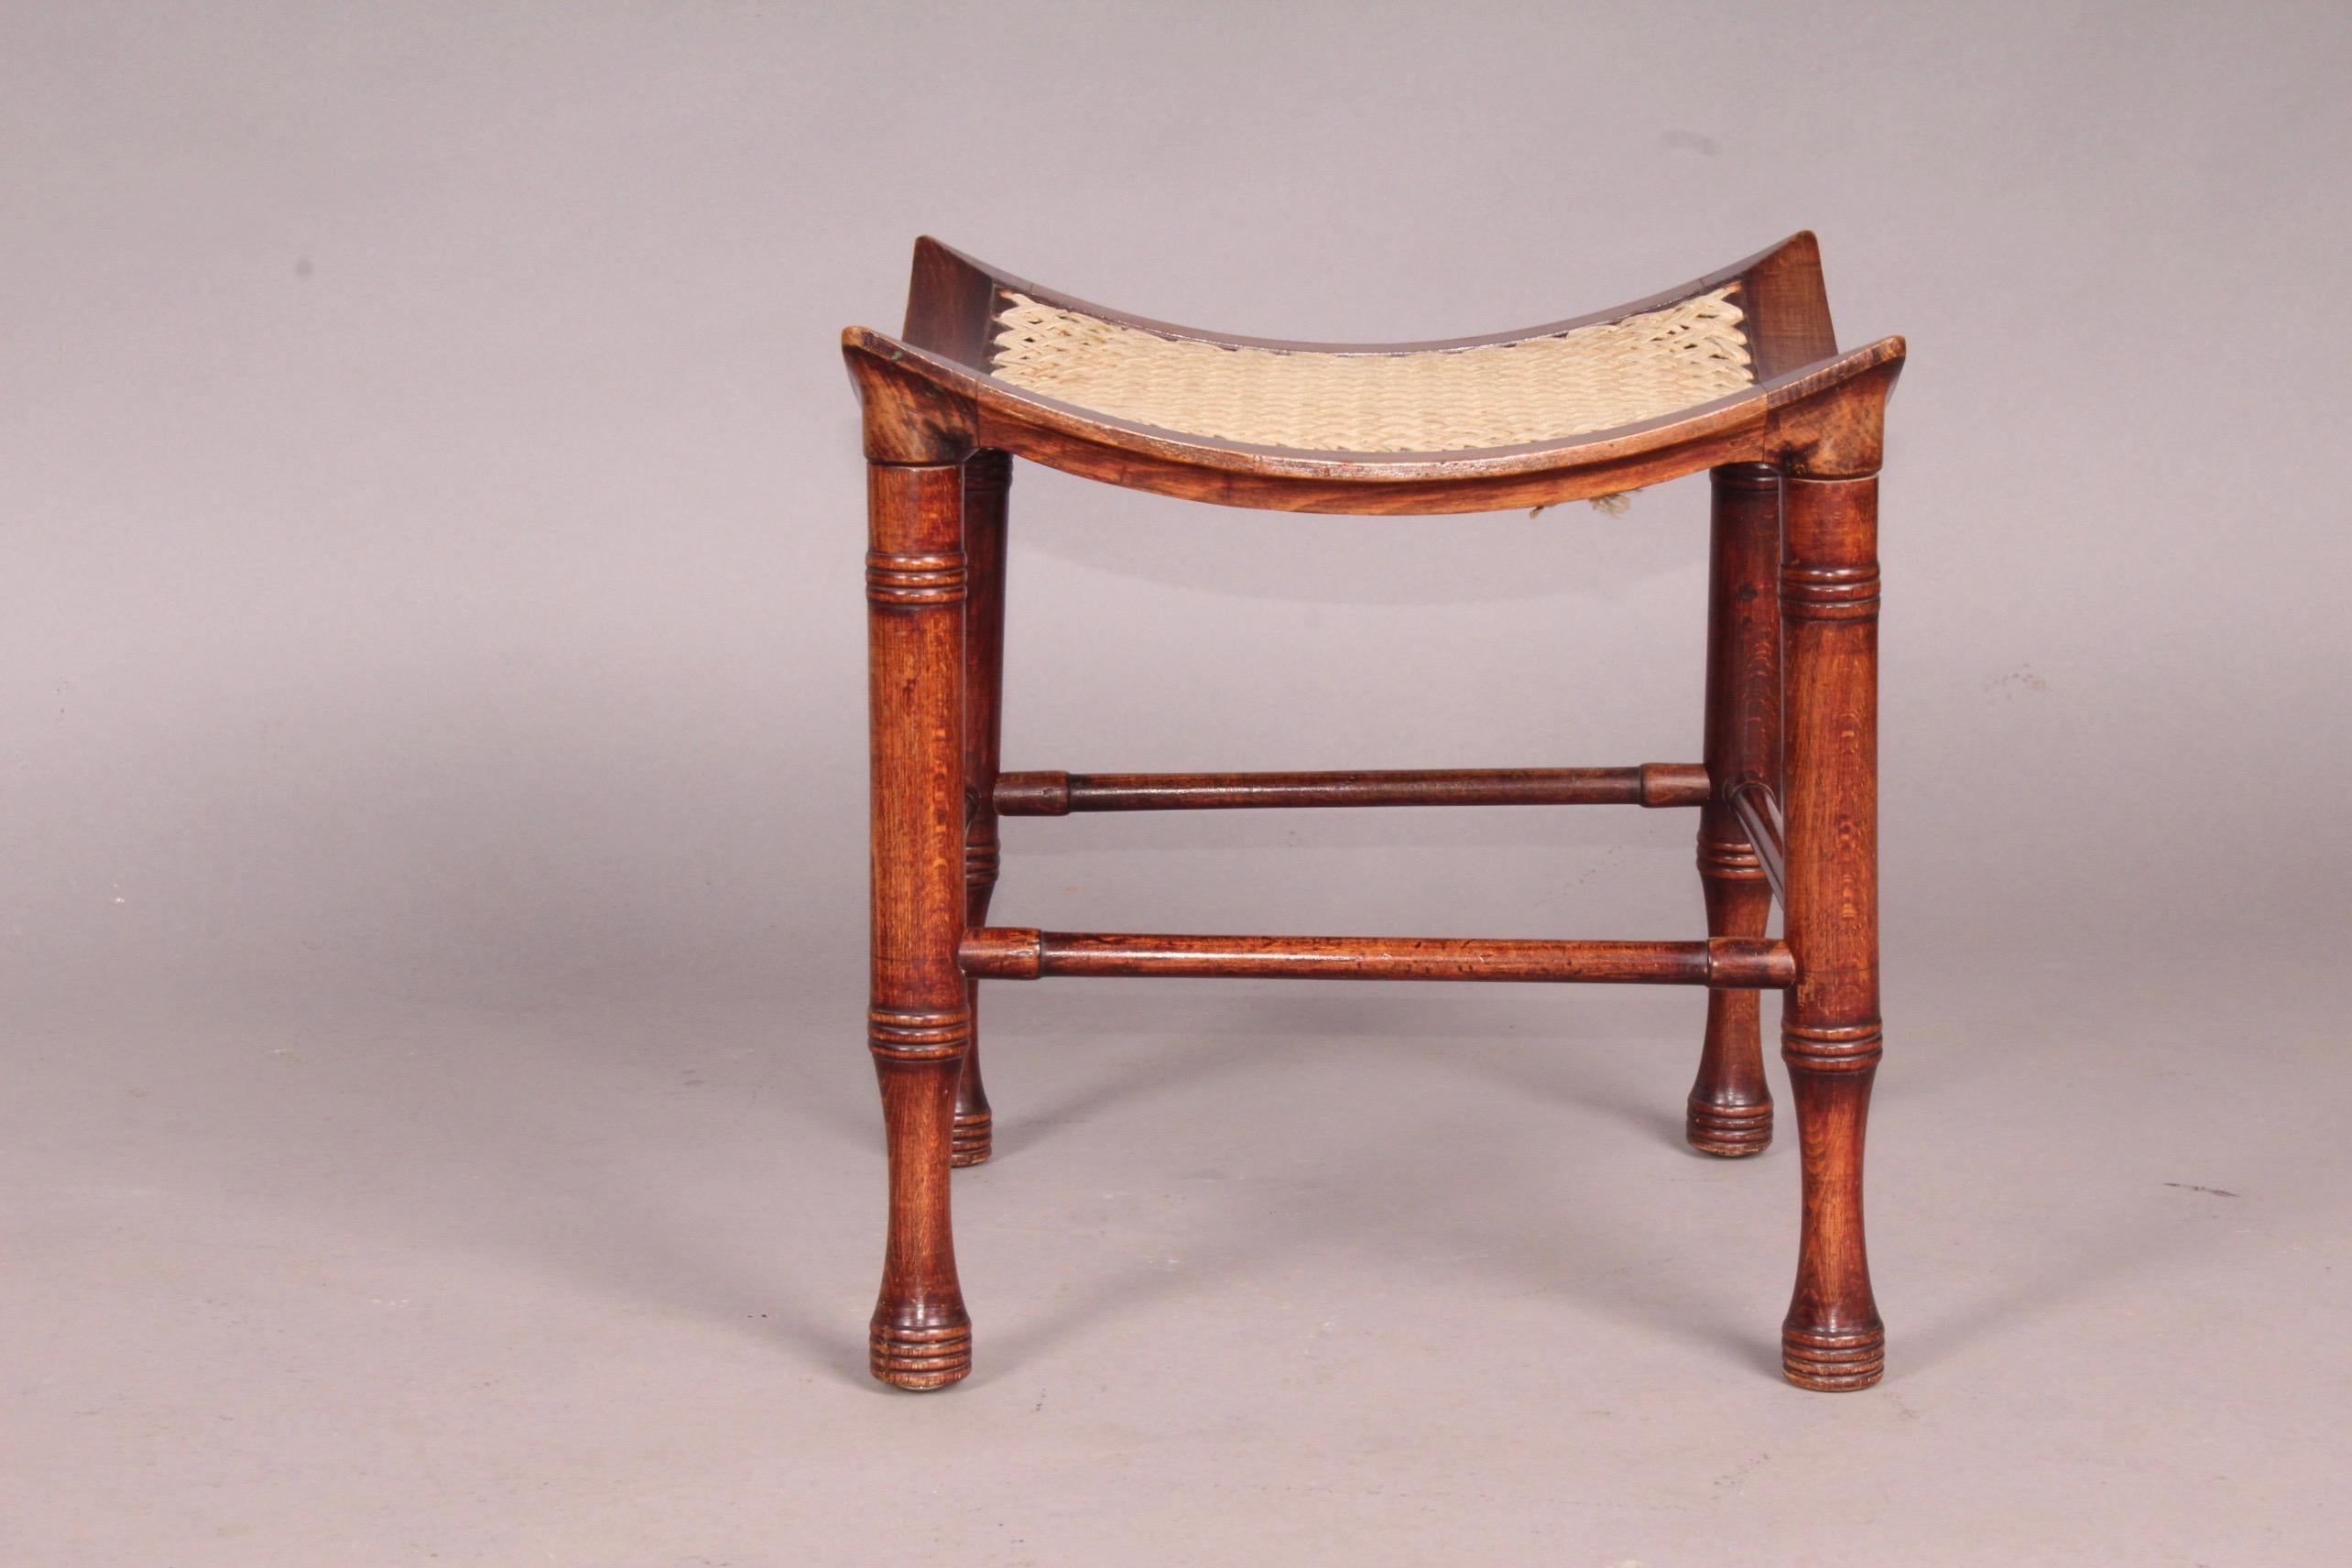 Liberty & Co. stained beech dish shaped Thebes stool with ring turned legs small stain on the fabric.